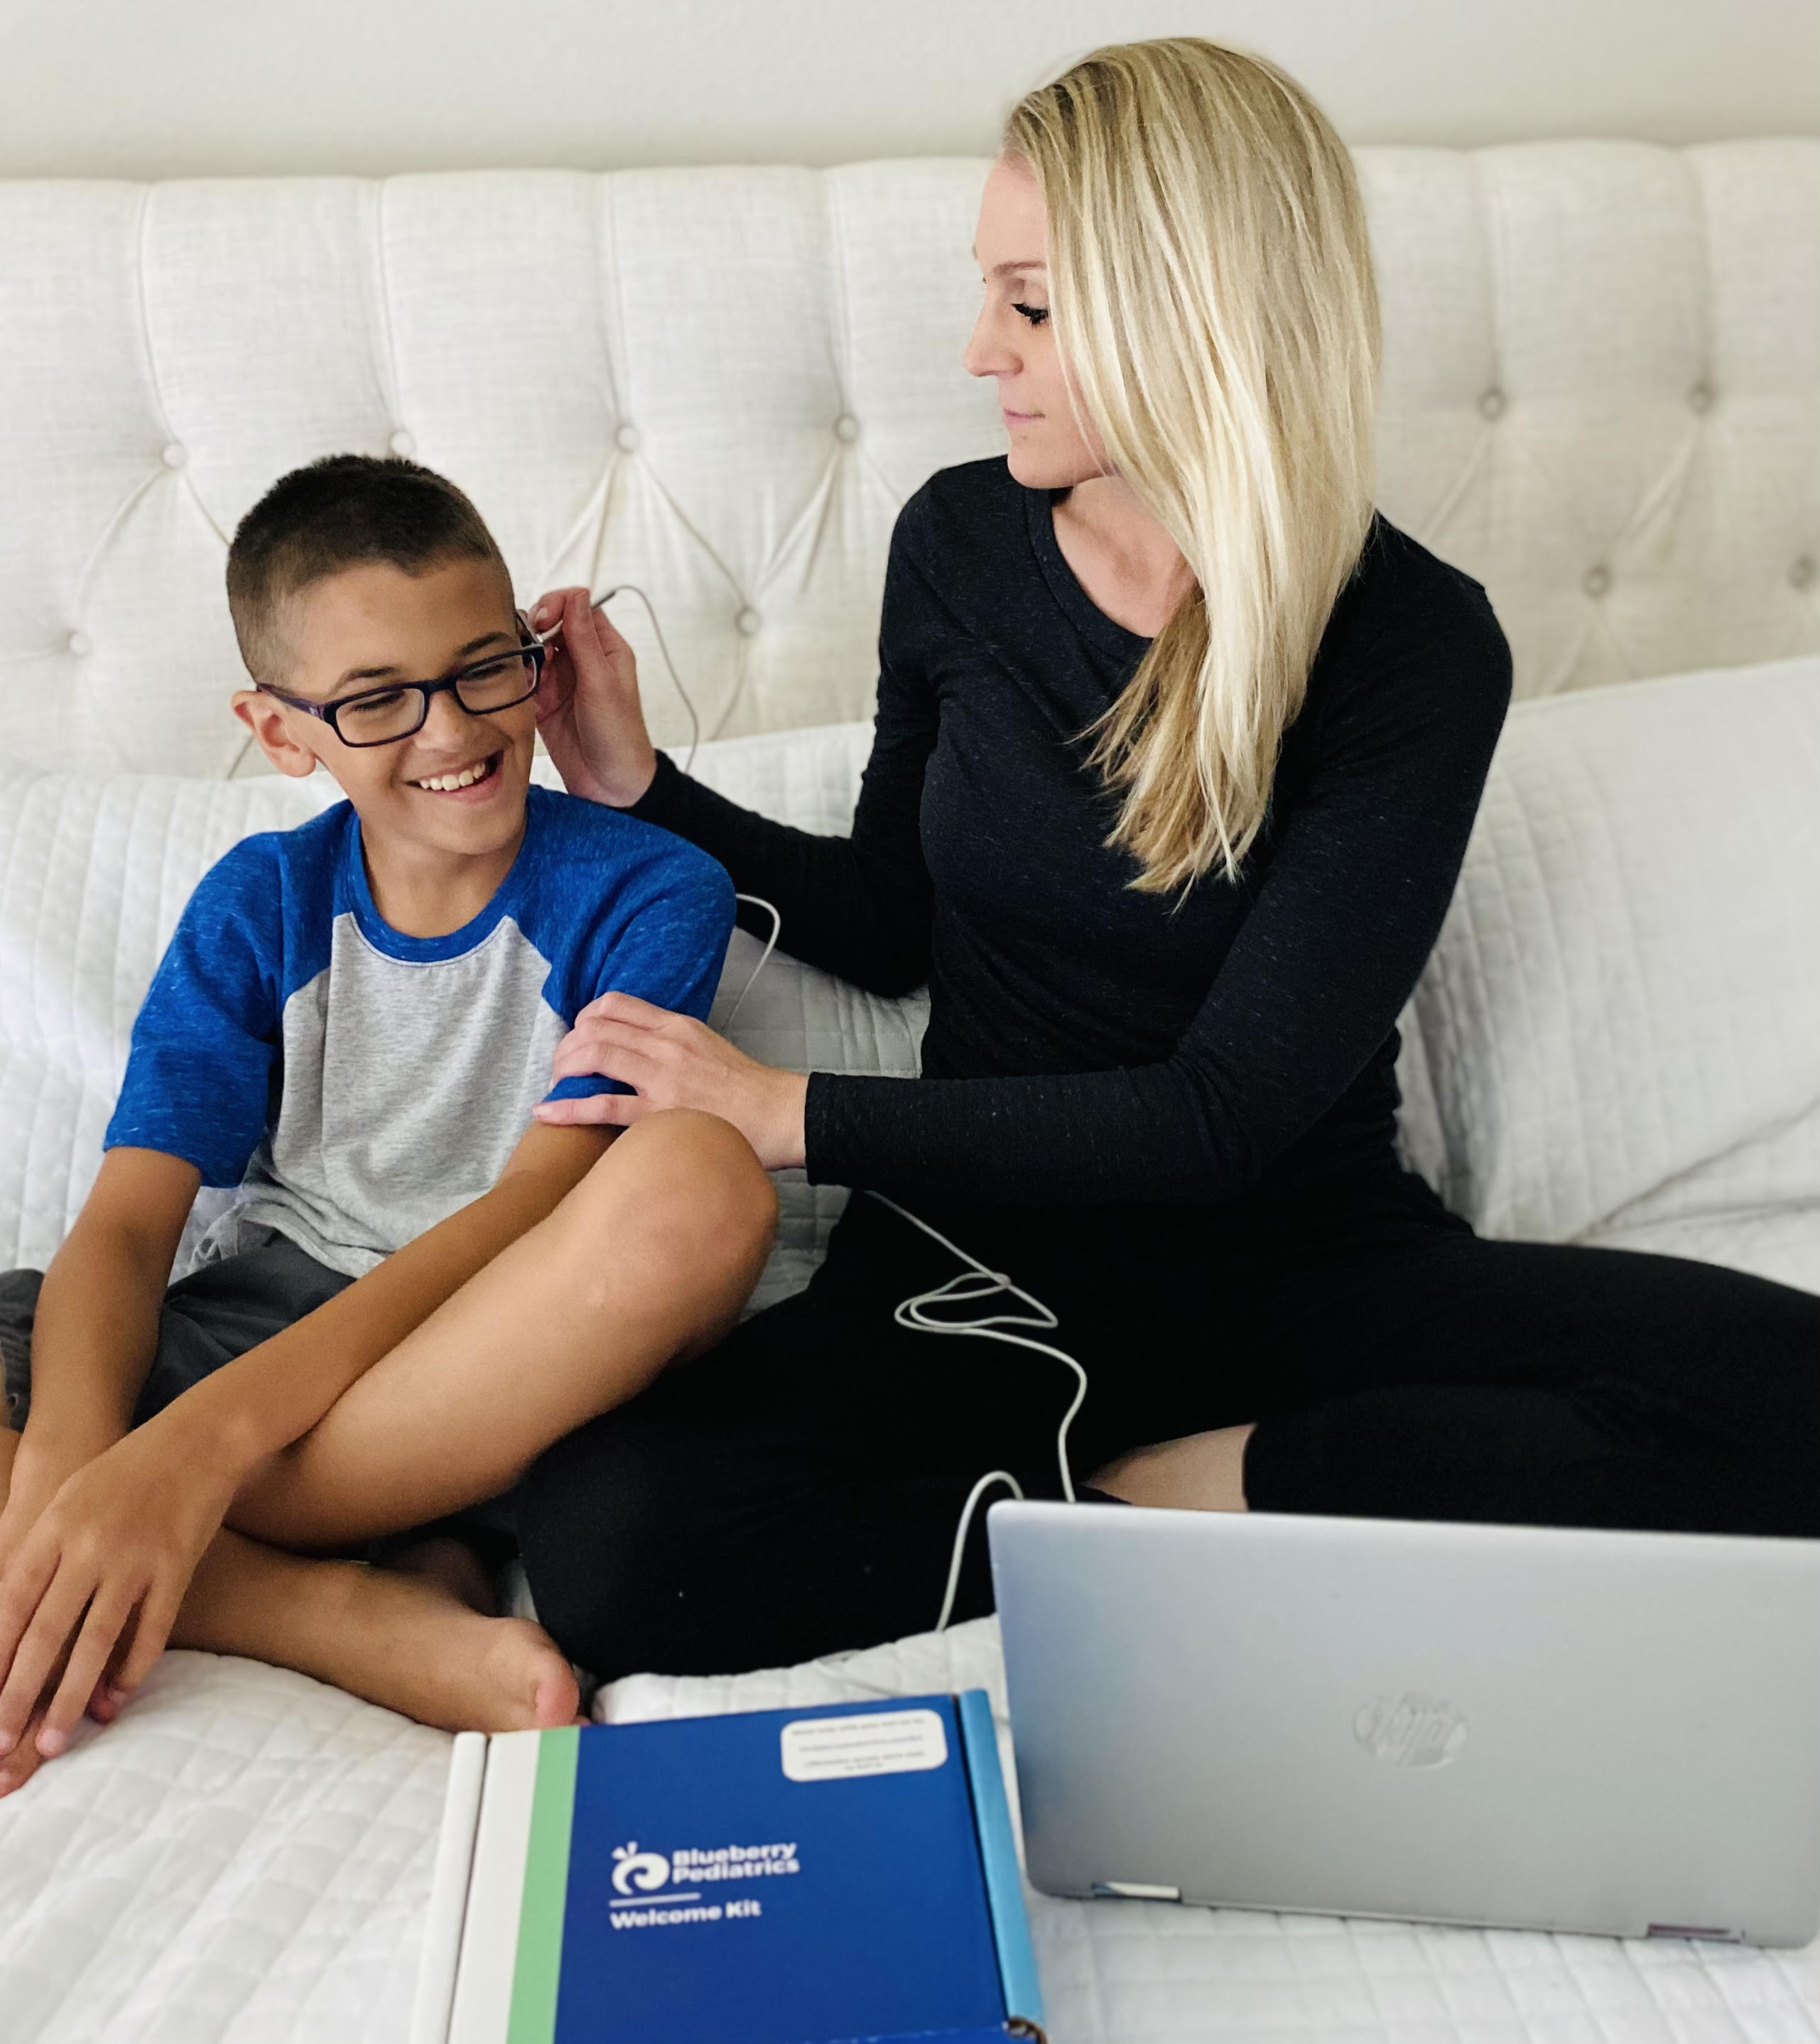 Online pediatricians at Blueberry Pediatrics make it easy to have a telehealth appointment for your kids in the comfort of your own home and in your jammies ;)